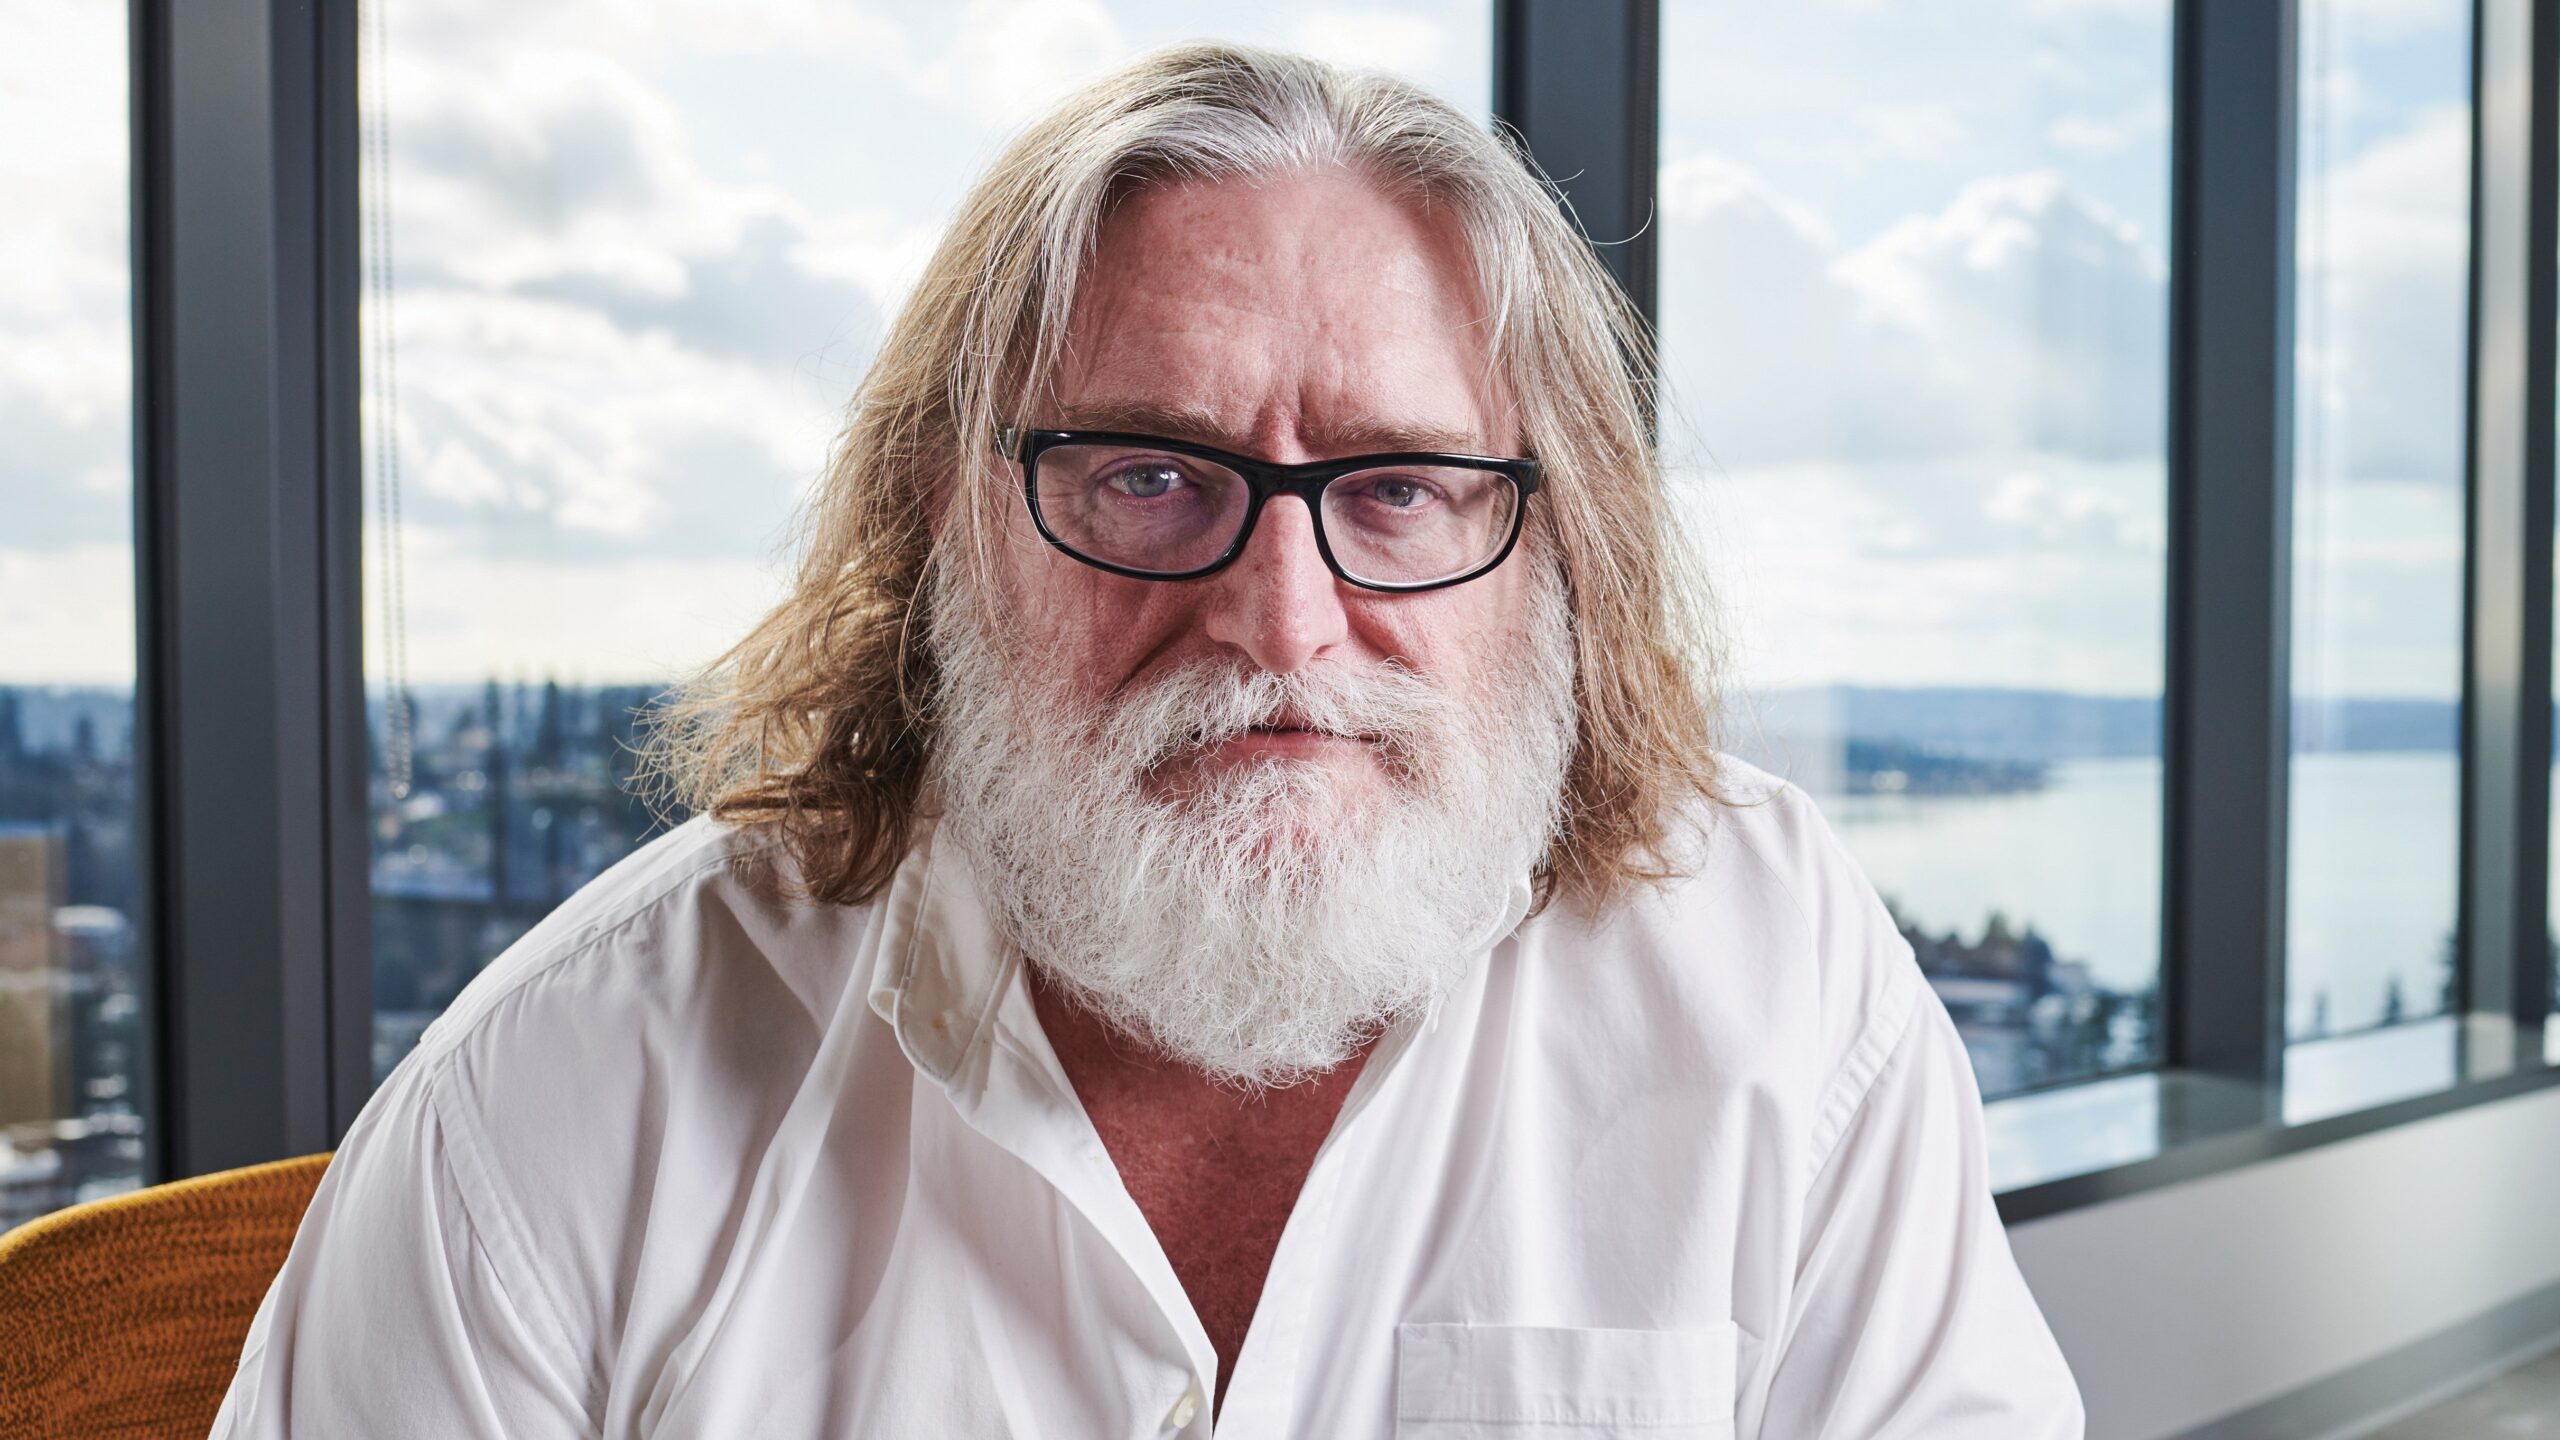 You are currently viewing Gabe Newell Ordered to Attend In-Person Deposition for Antitrust Lawsuit: What This Means for the Gaming Industry